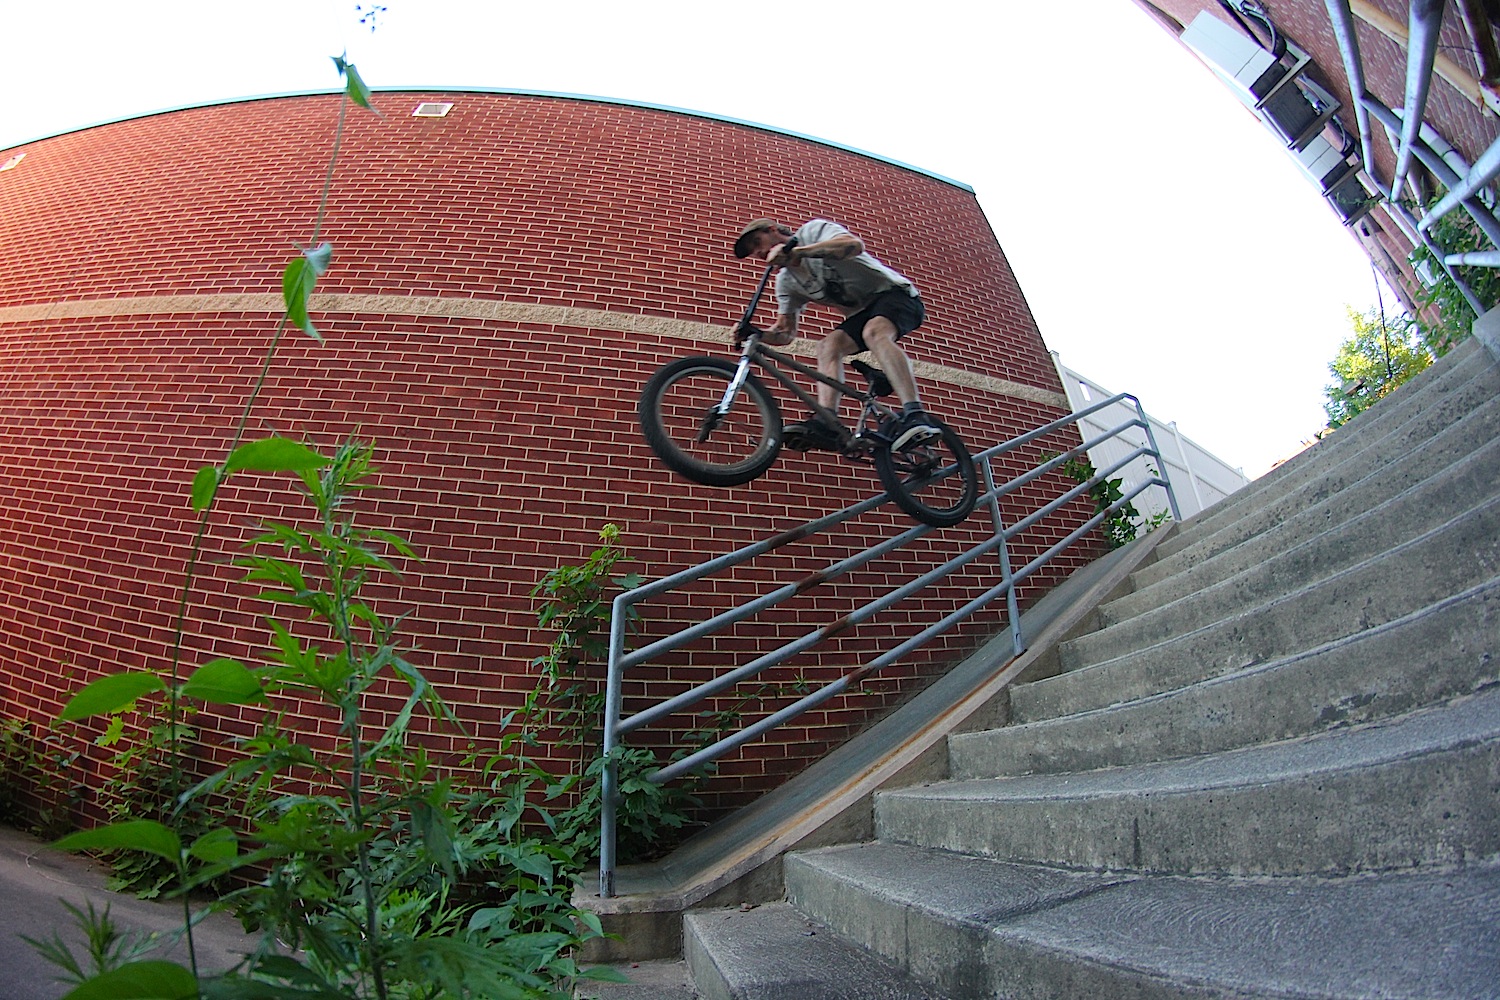 Casual Icepick in a New England Border Town.